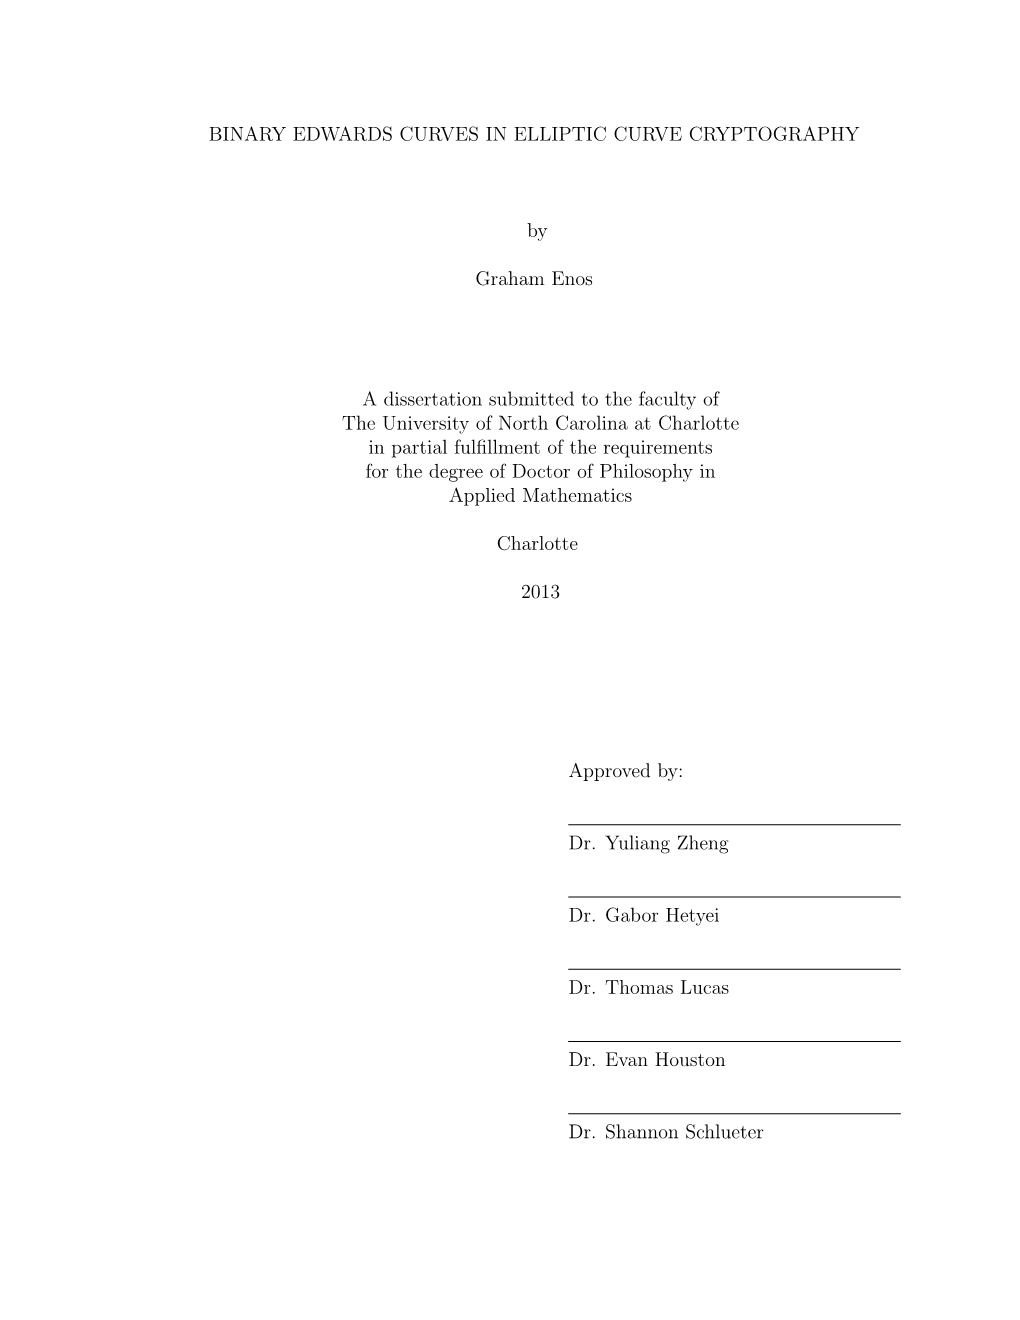 BINARY EDWARDS CURVES in ELLIPTIC CURVE CRYPTOGRAPHY by Graham Enos a Dissertation Submitted to the Faculty of the University Of